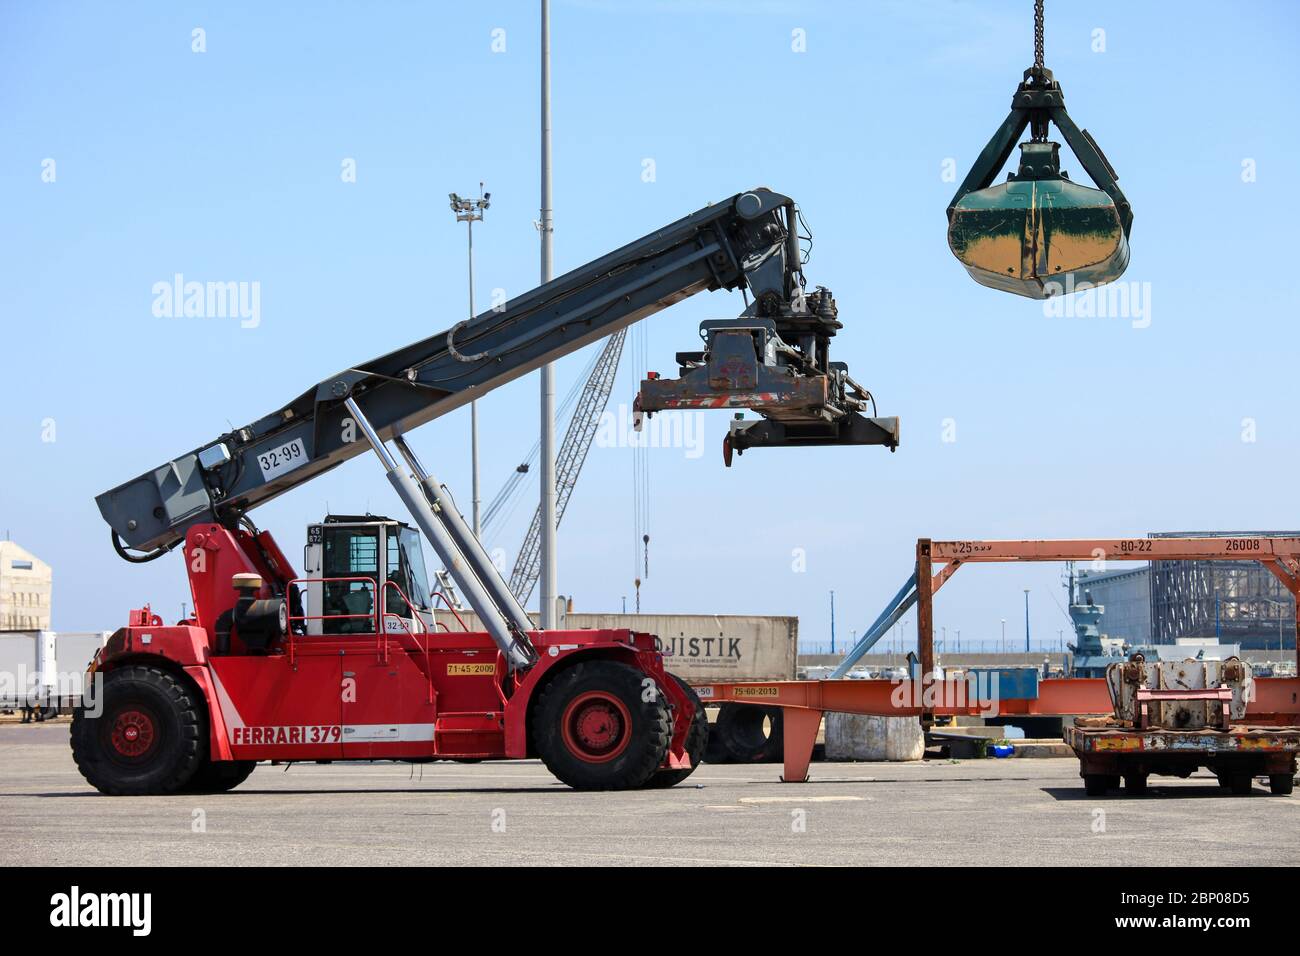 Large Container handler and Clamshell bucket at a local port. Stock Photo